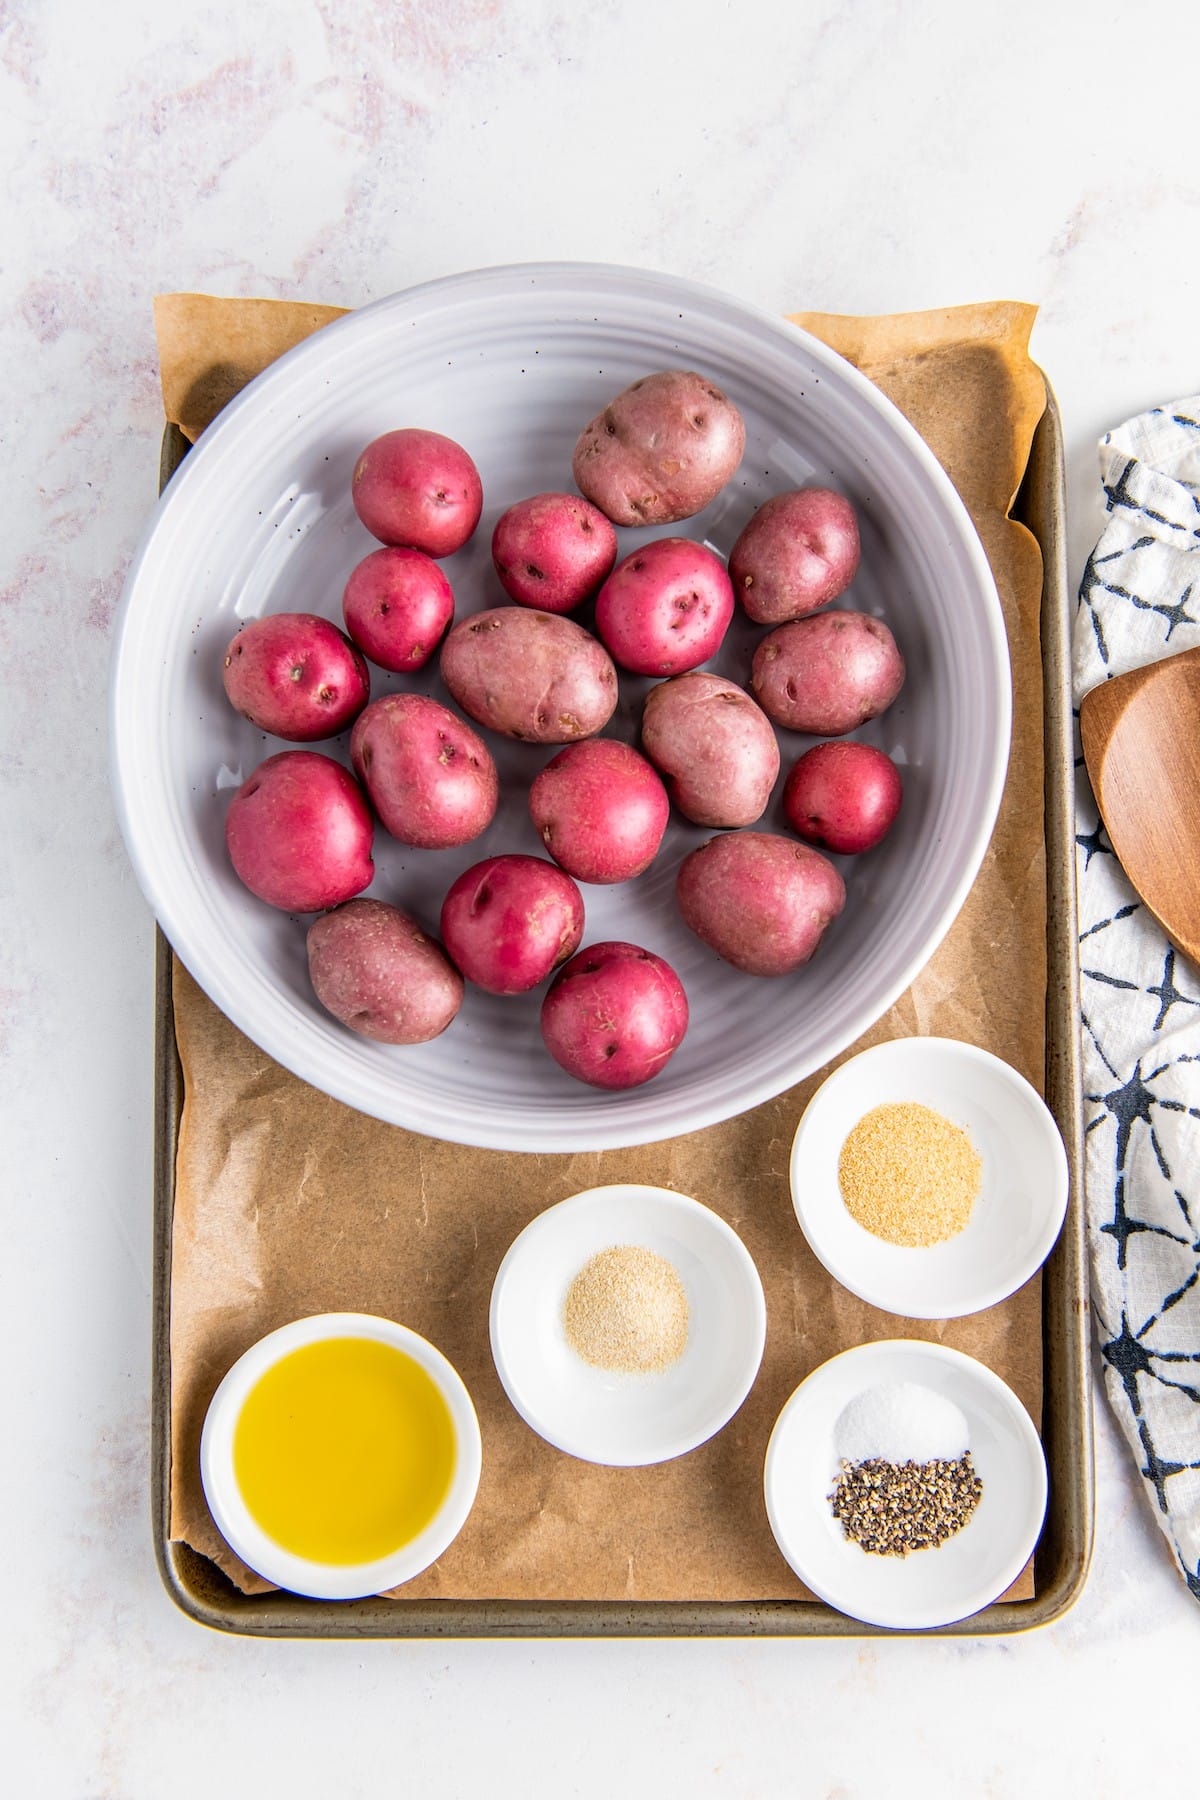 Ingredients for roasted baby potatoes.